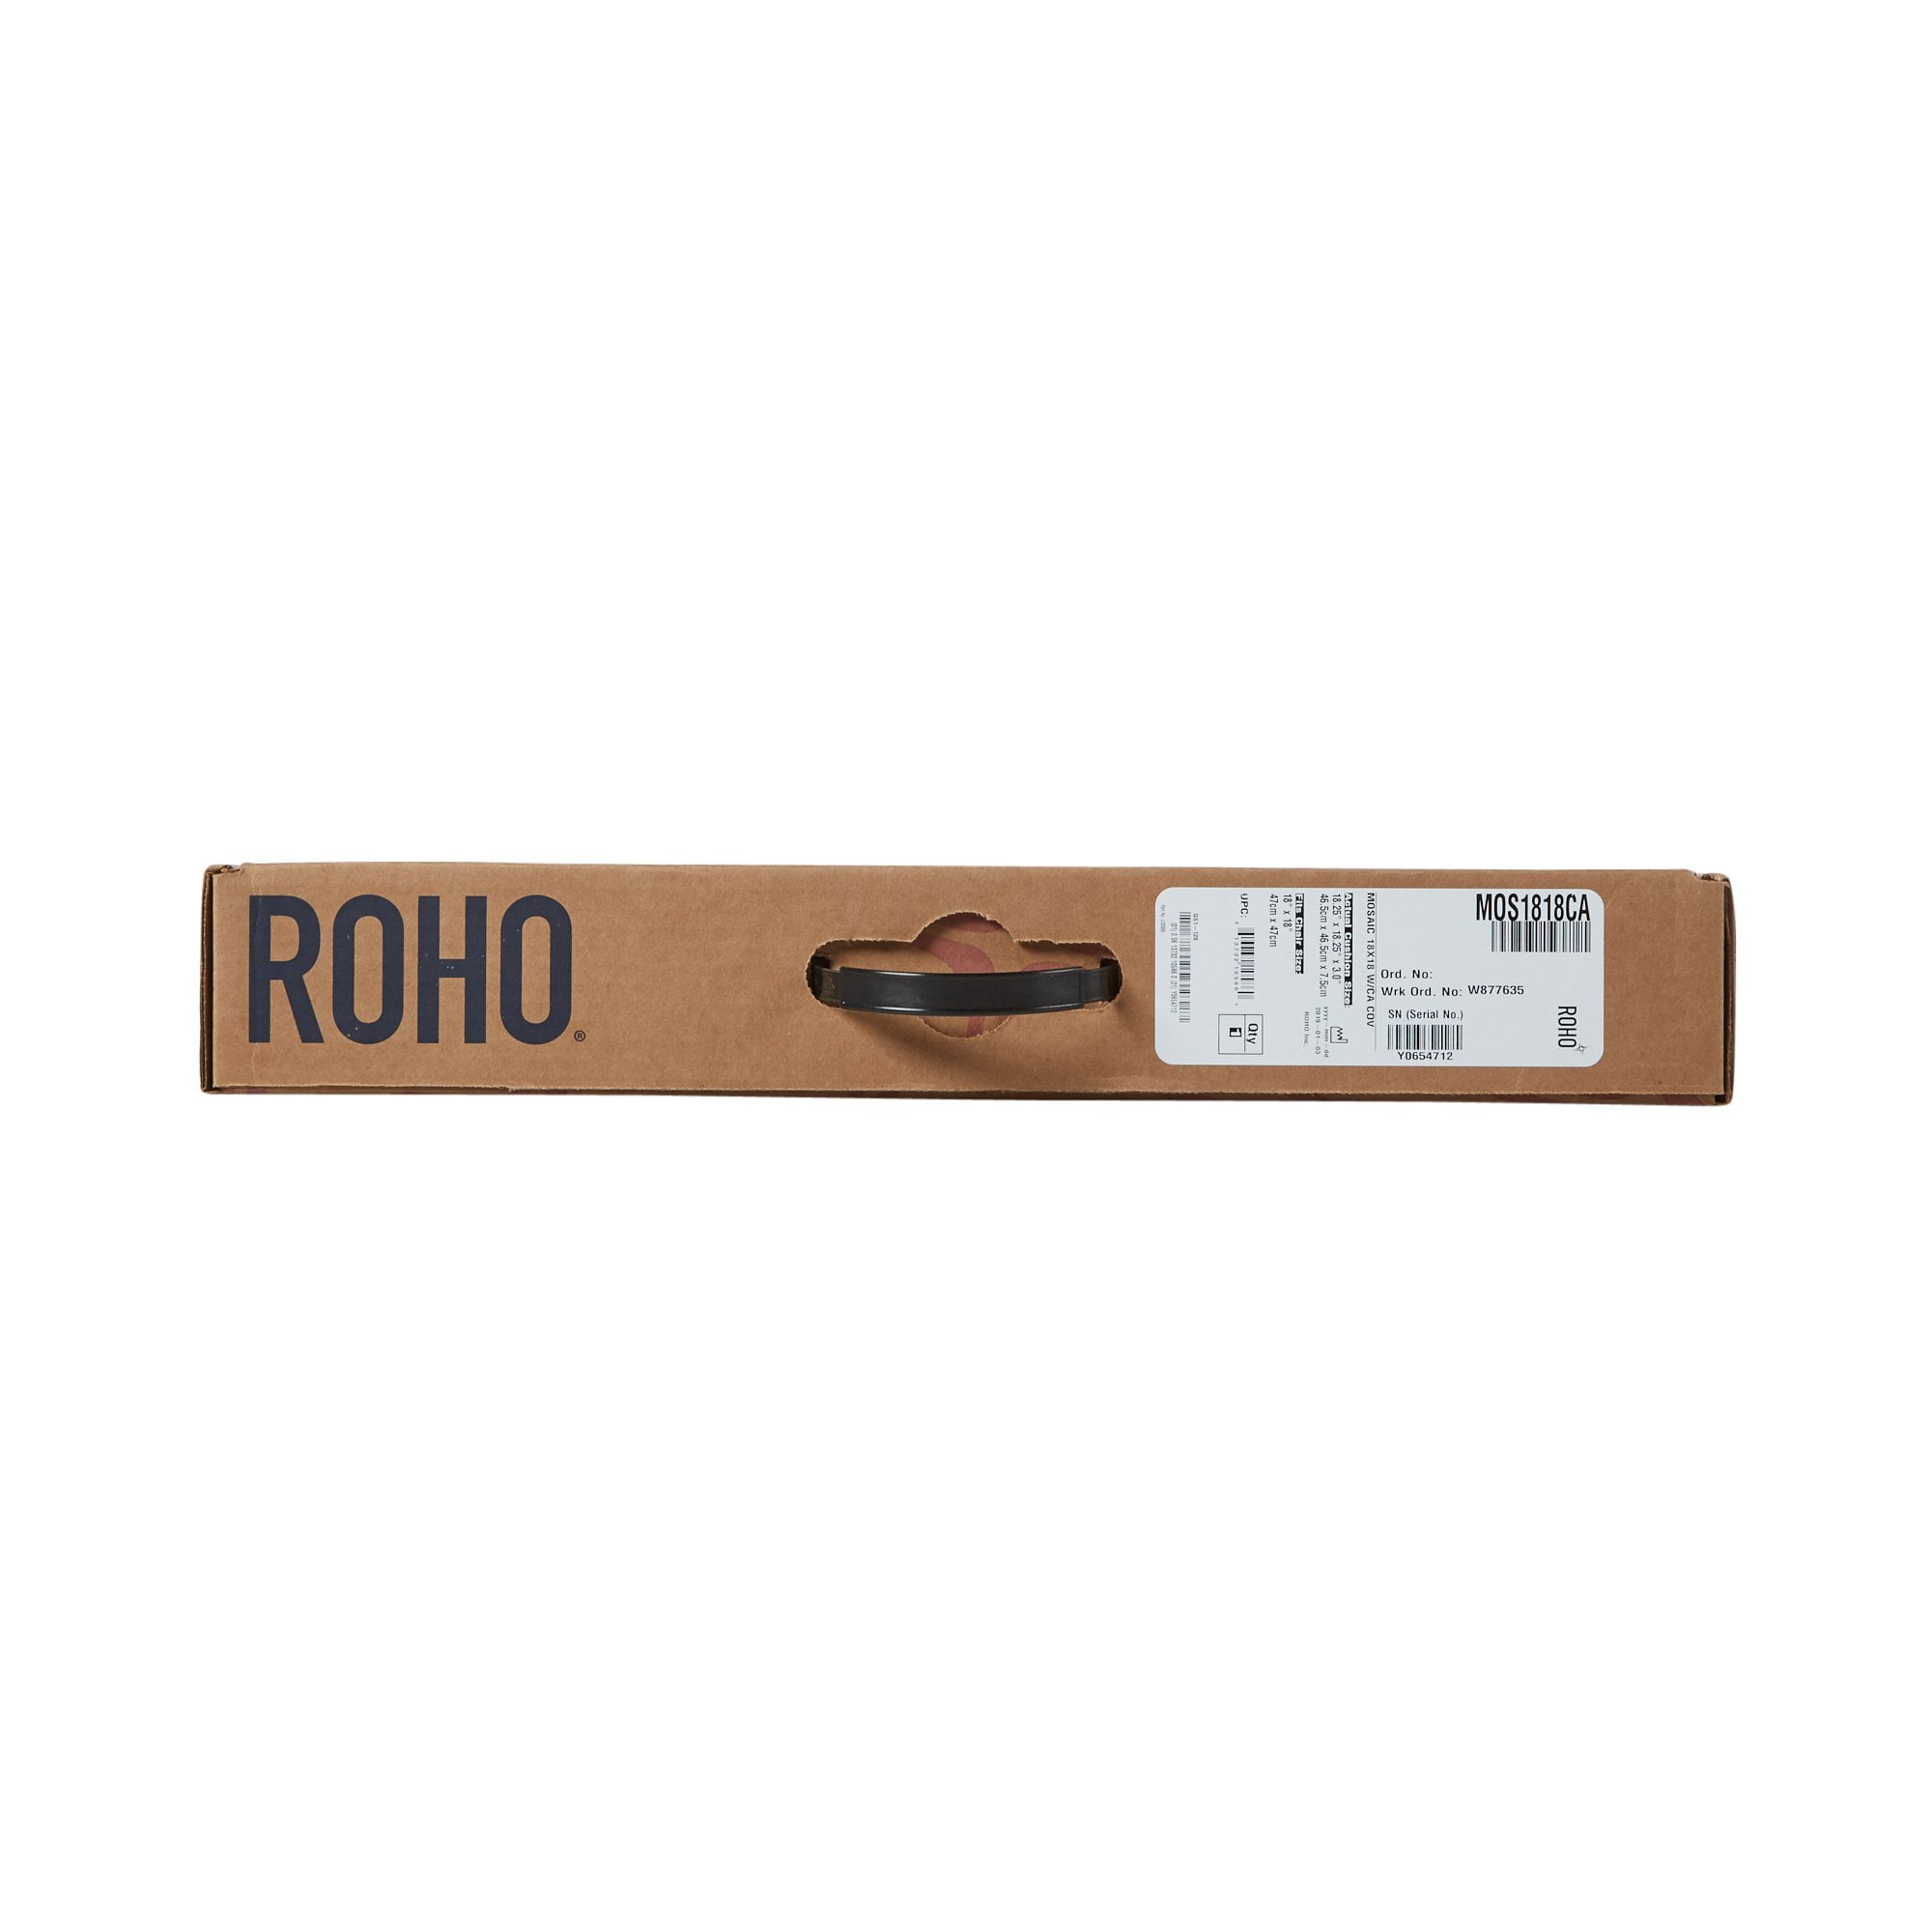 Roho Mosaic Seat Cushion, 18 in. W x 16 in. D x 3 in. H, Air Cells, Black, Inflatable | MOS1816CA